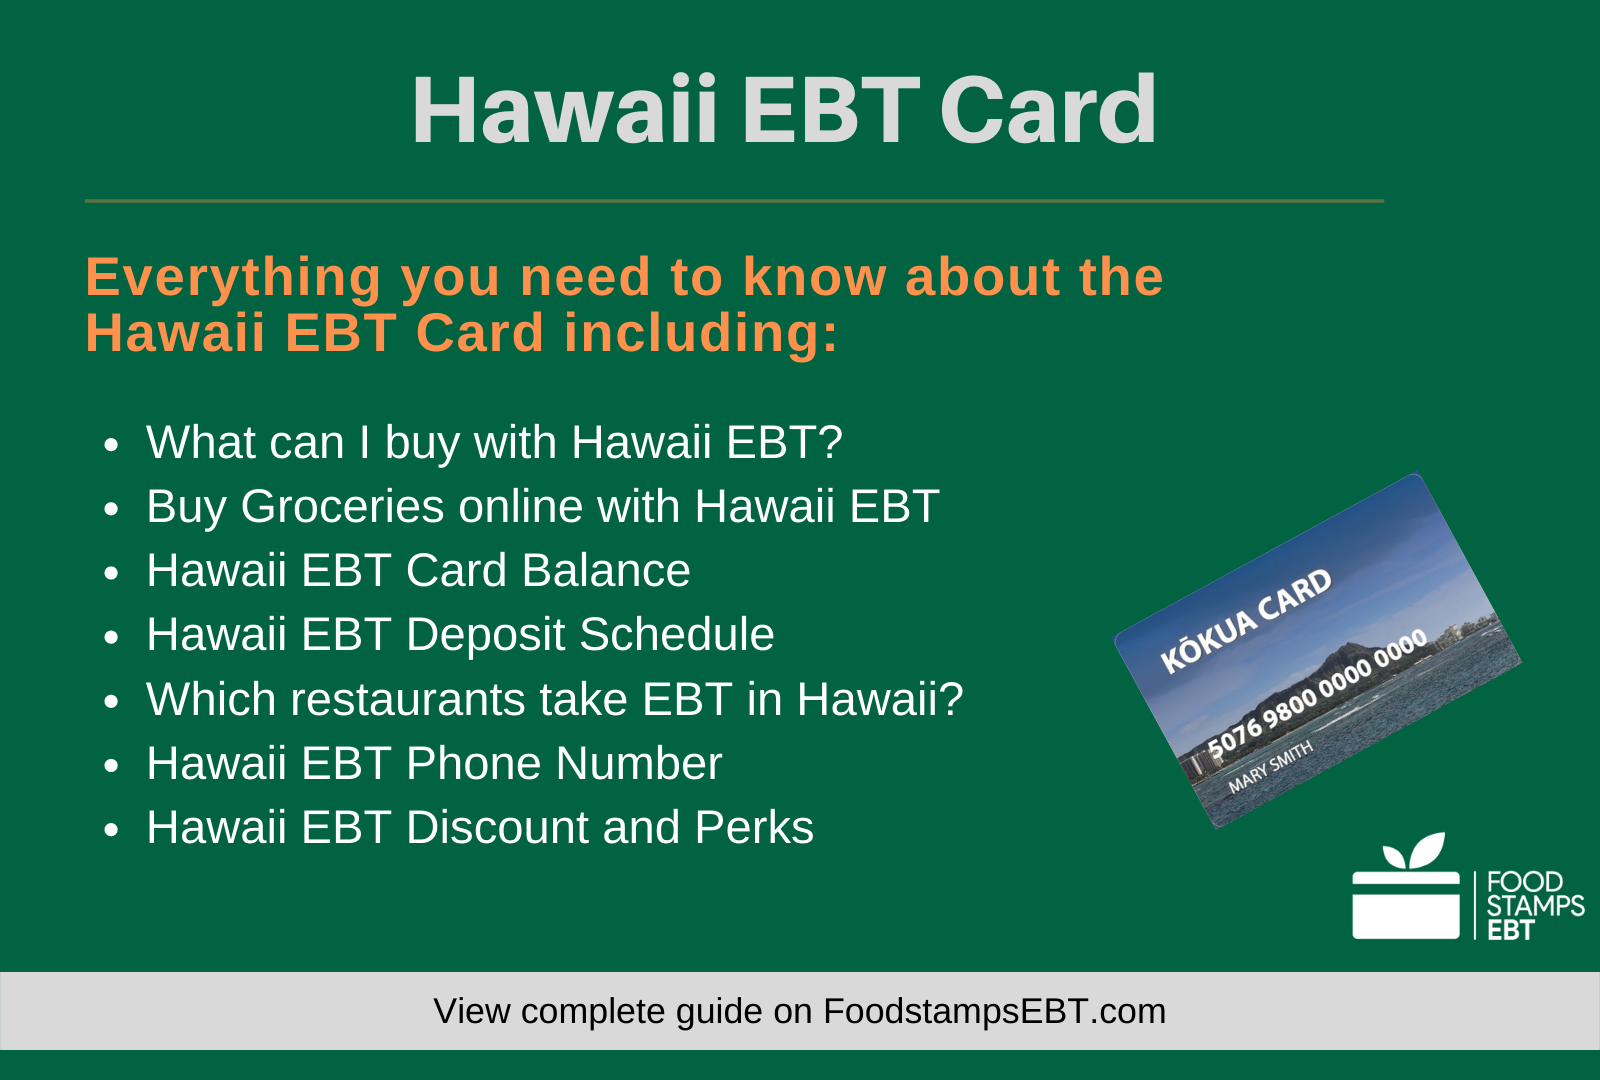 "Hawaii EBT Card Questions and Answers"